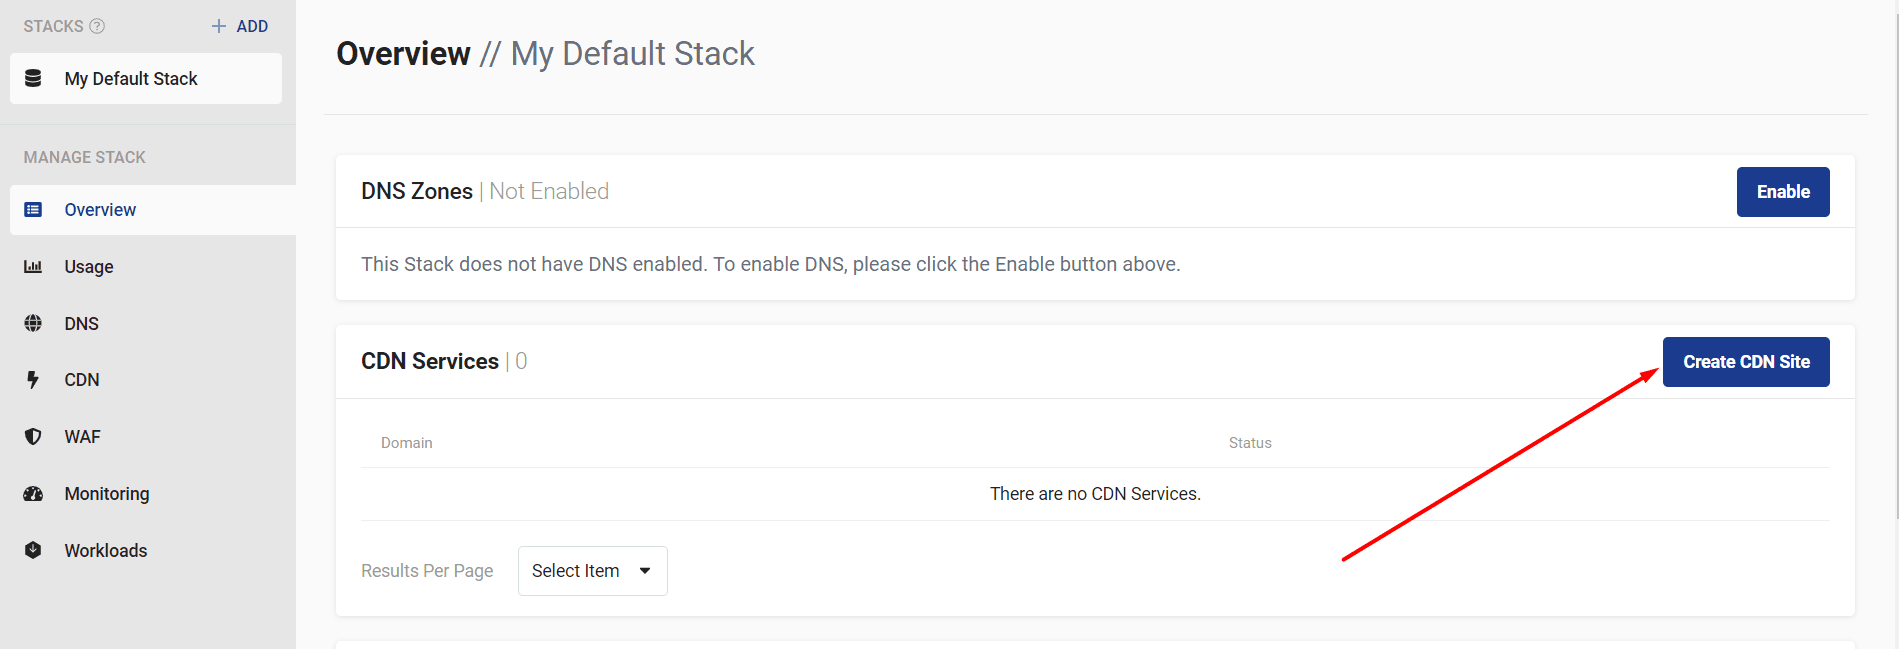 StackPath Overview Tab